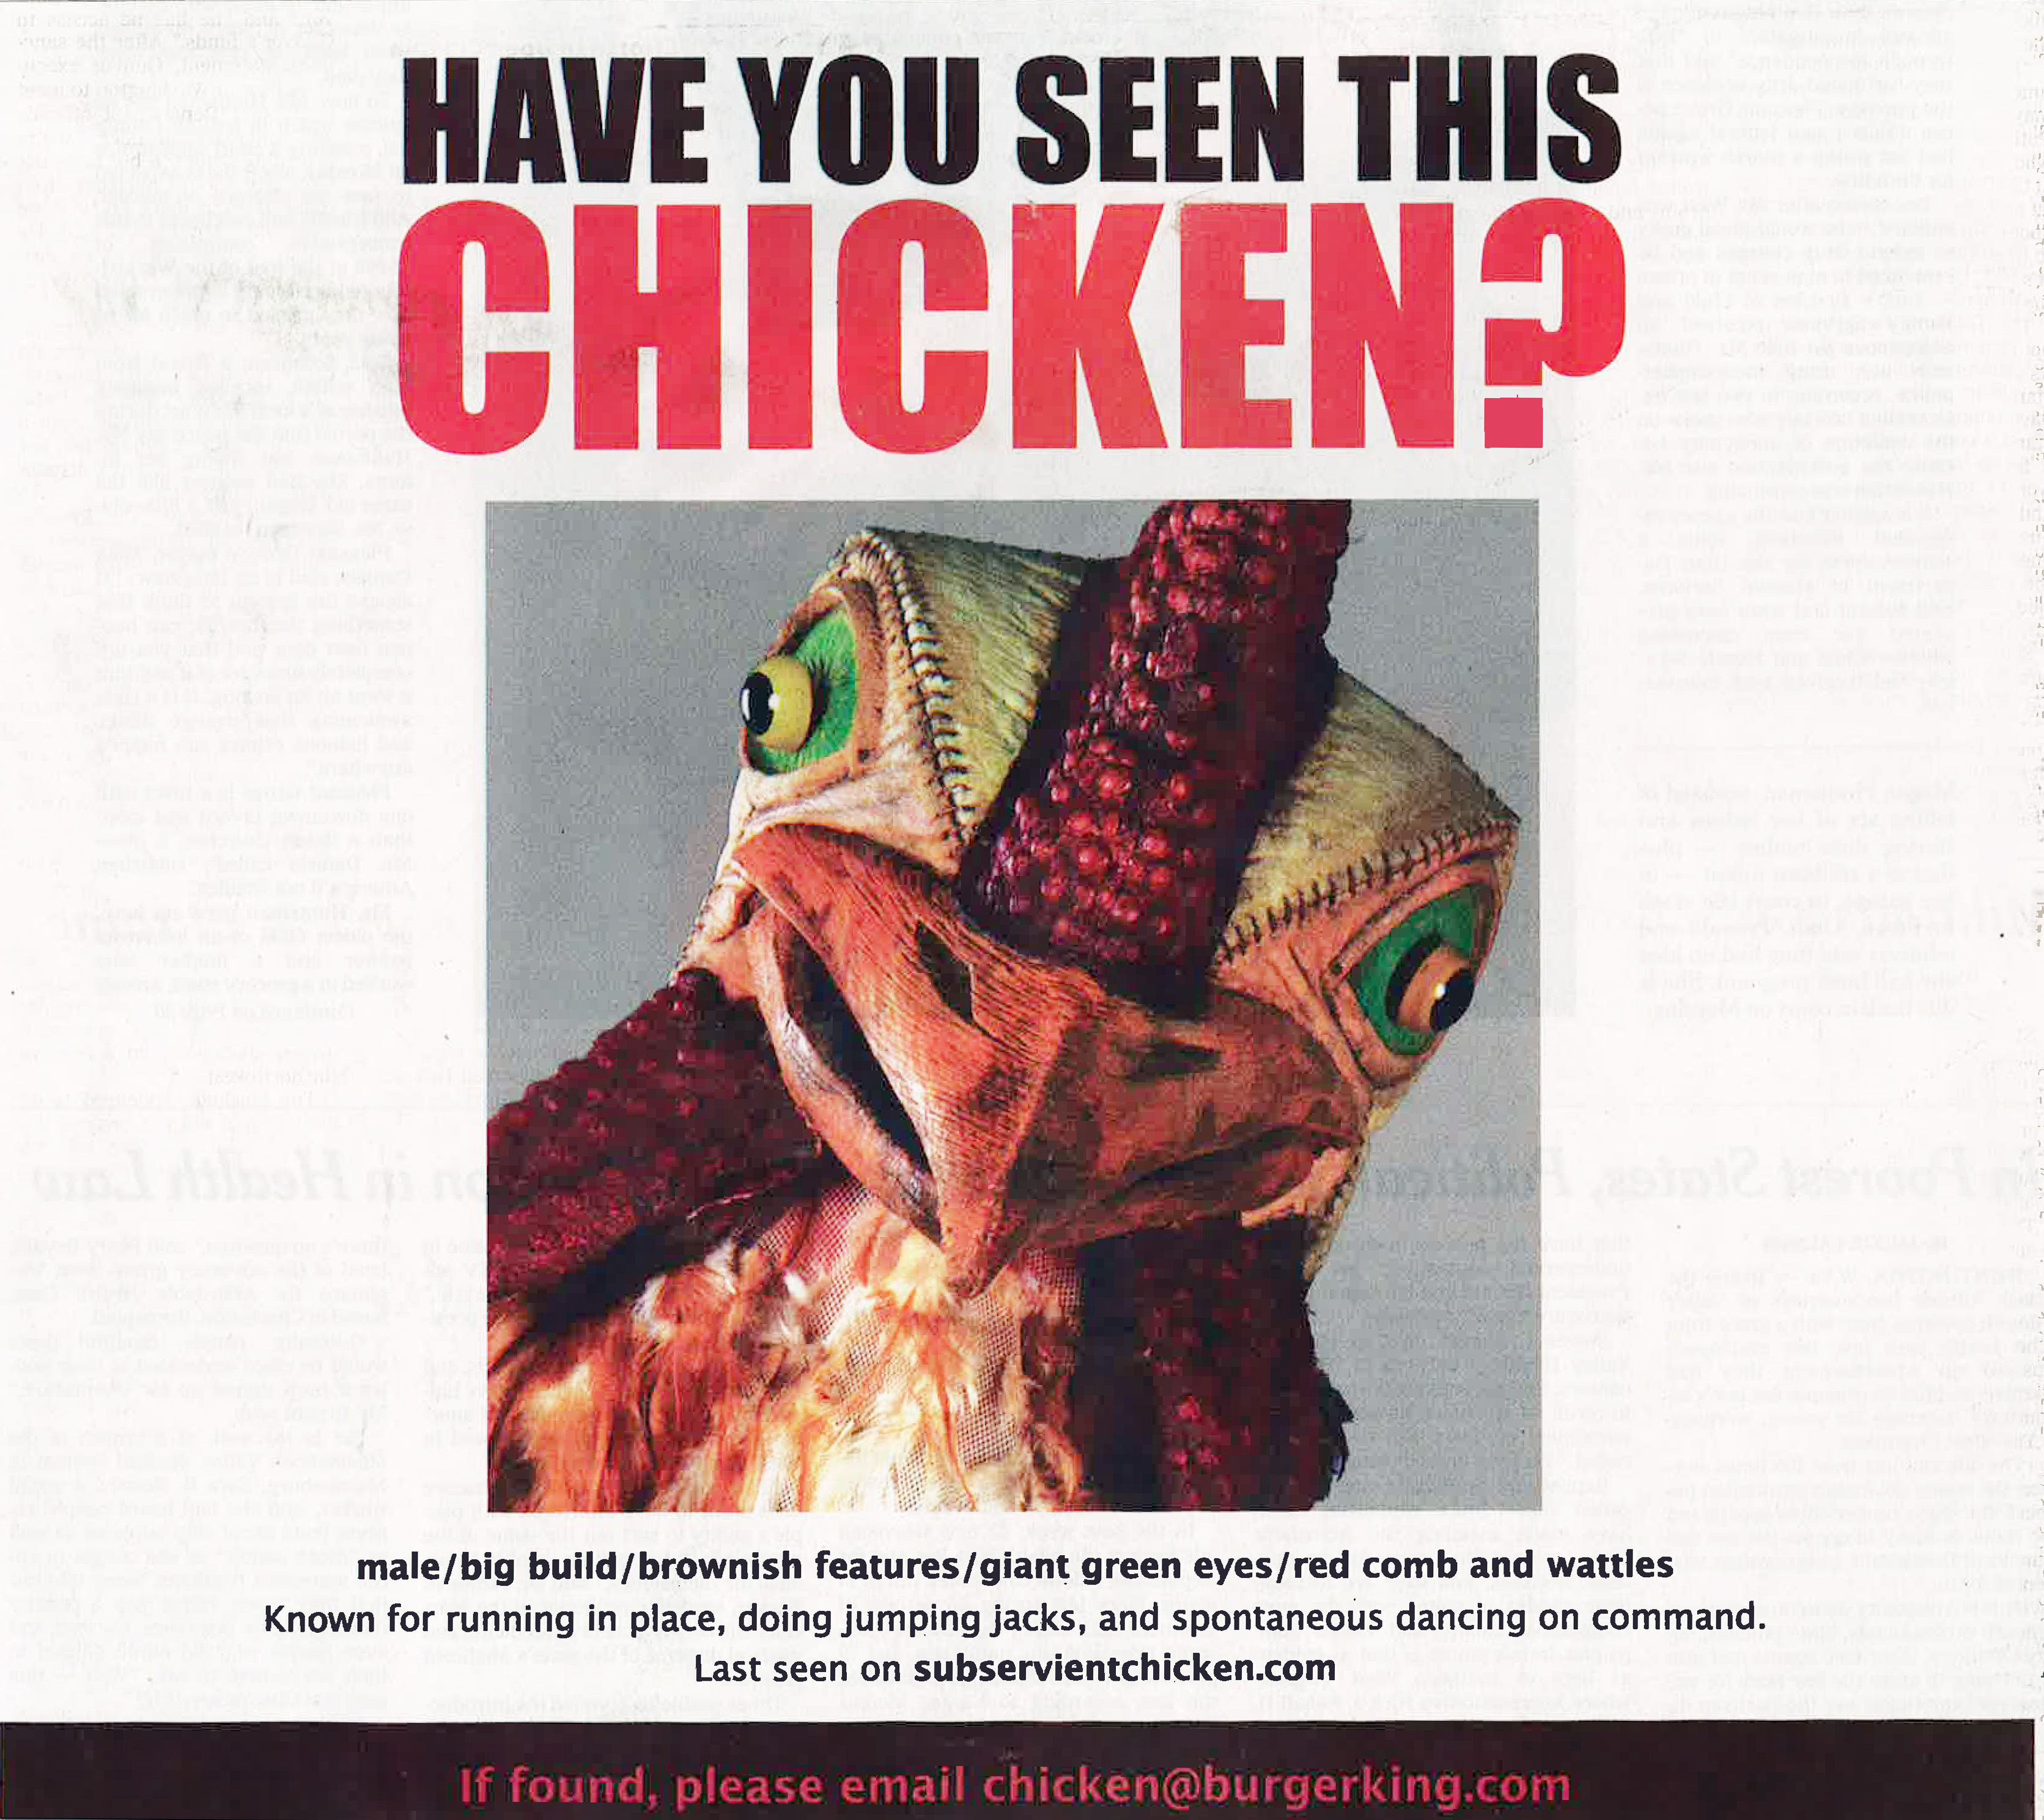 This Burger King advertisement appeared in the New York Times Apr. 27, 2014 (Burger King)